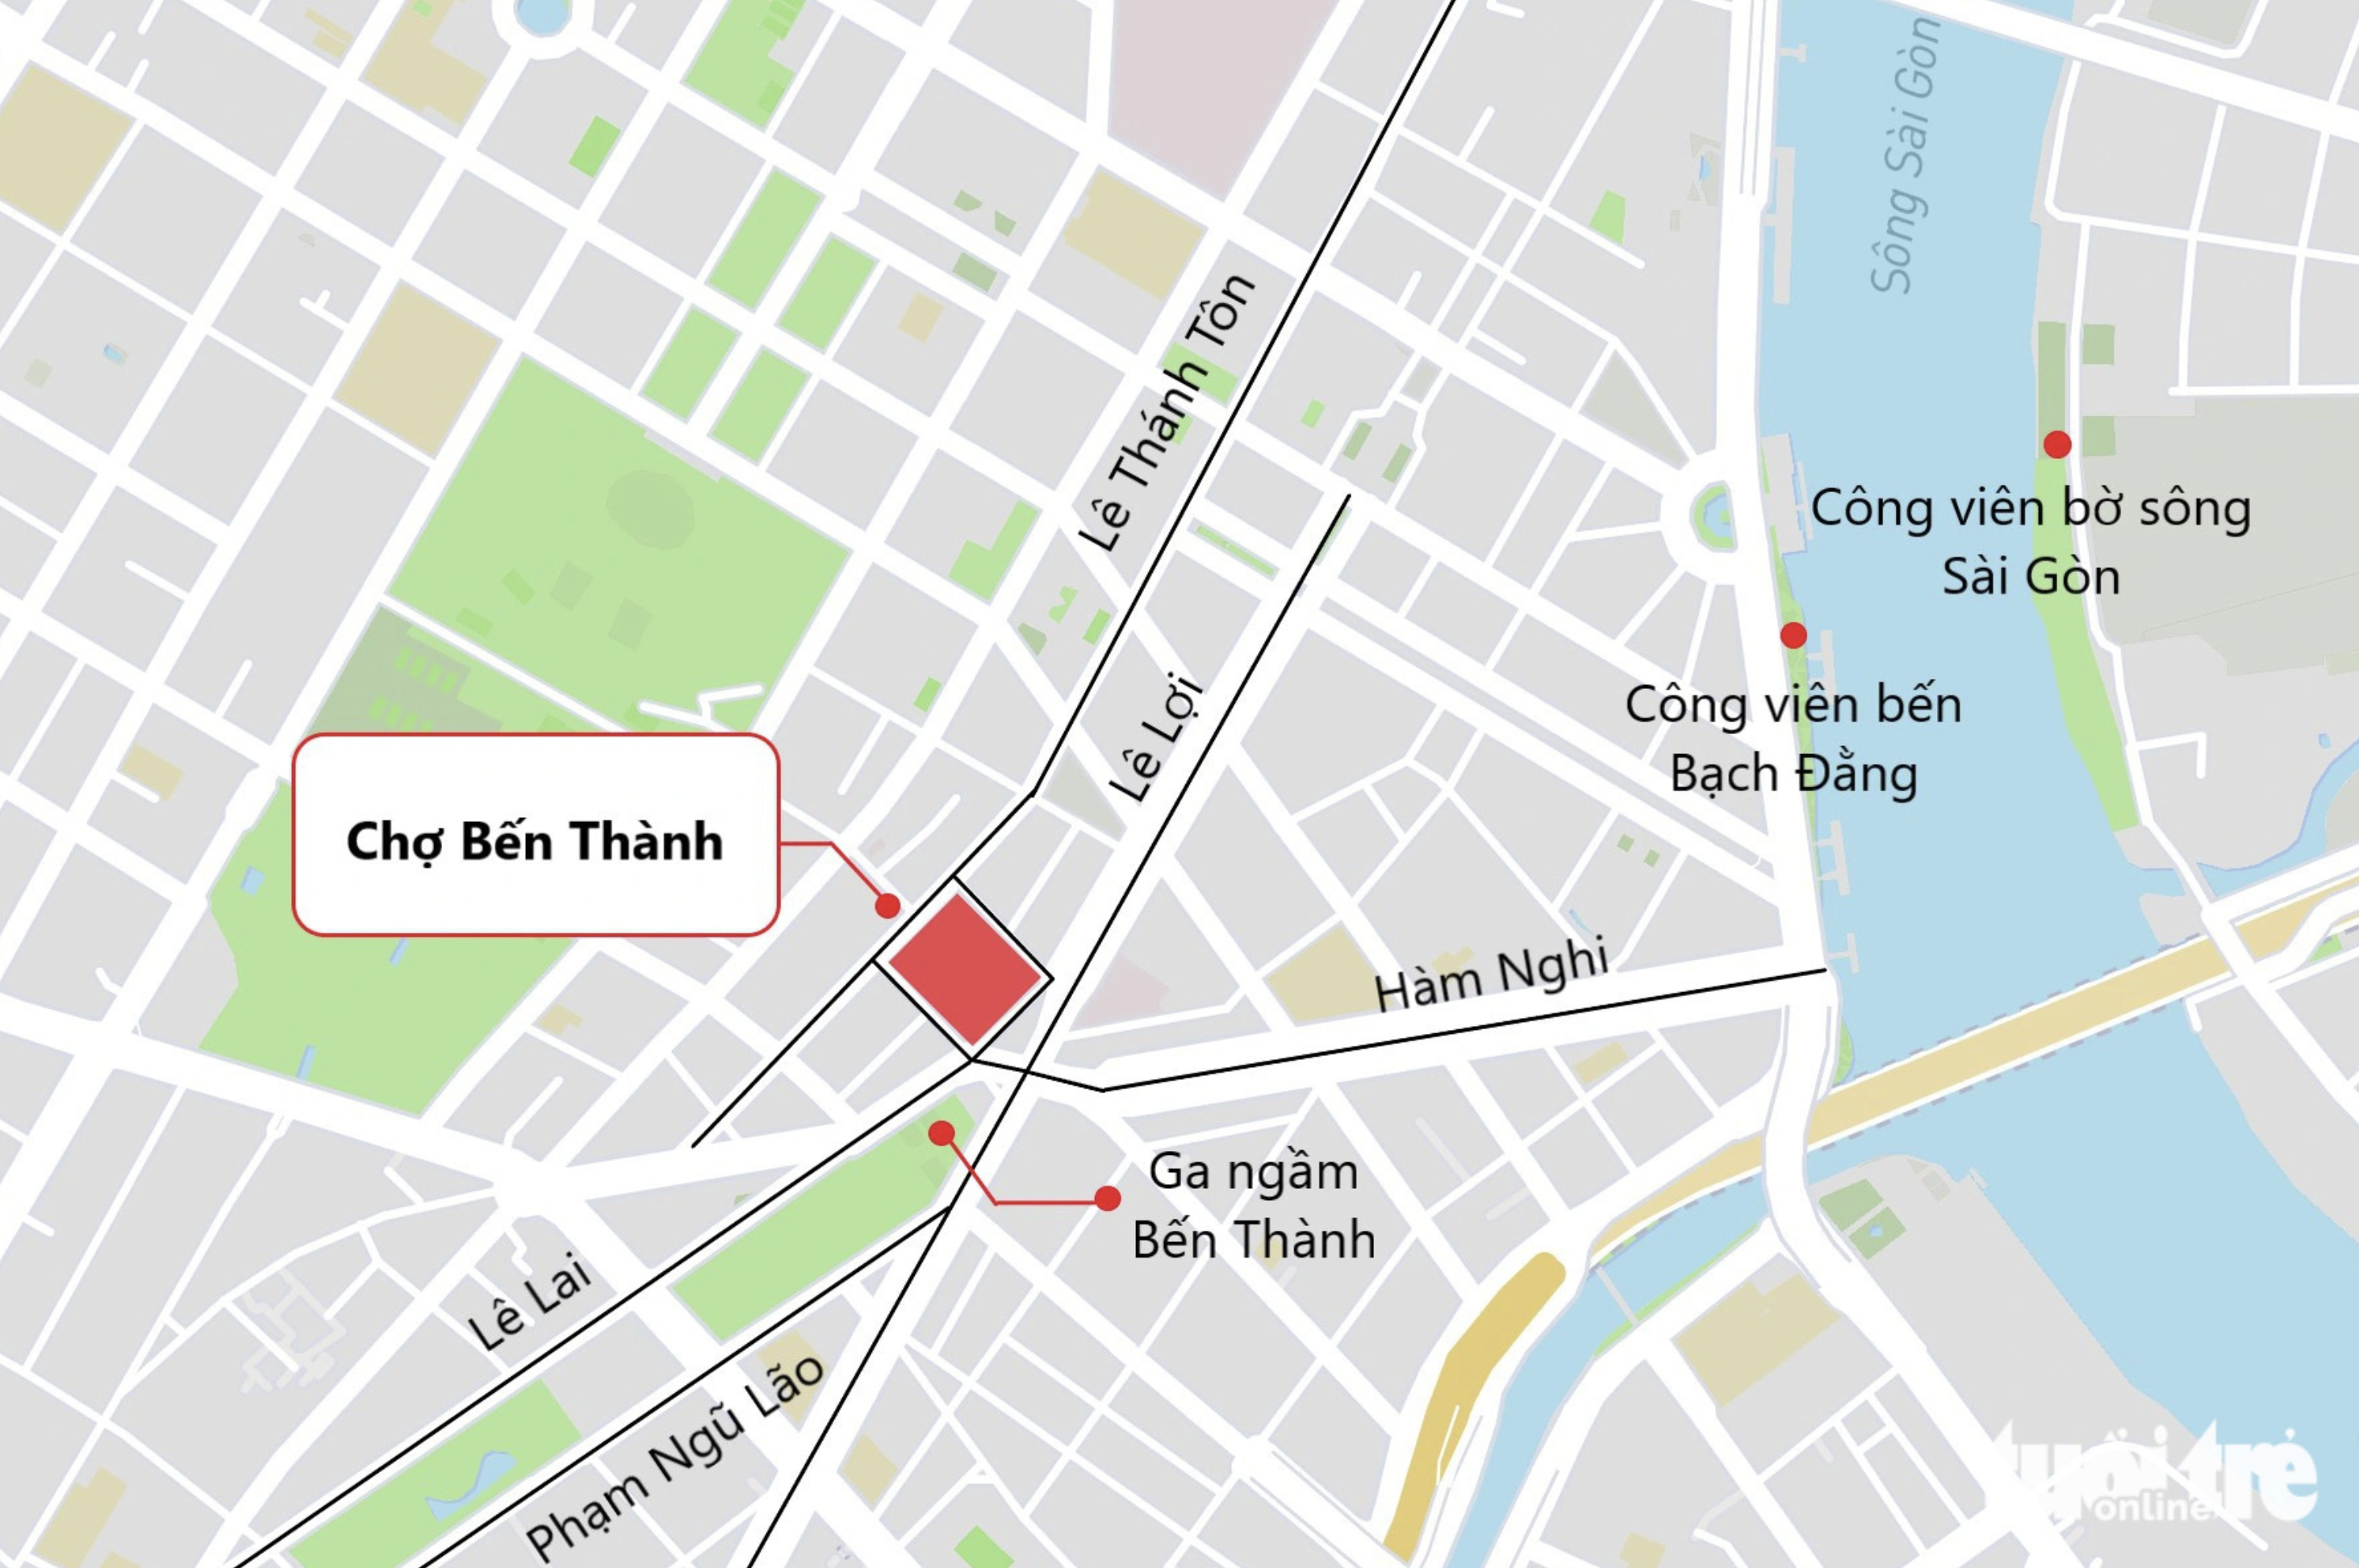 A map details Ben Thanh Market (painted red) and its surroundings